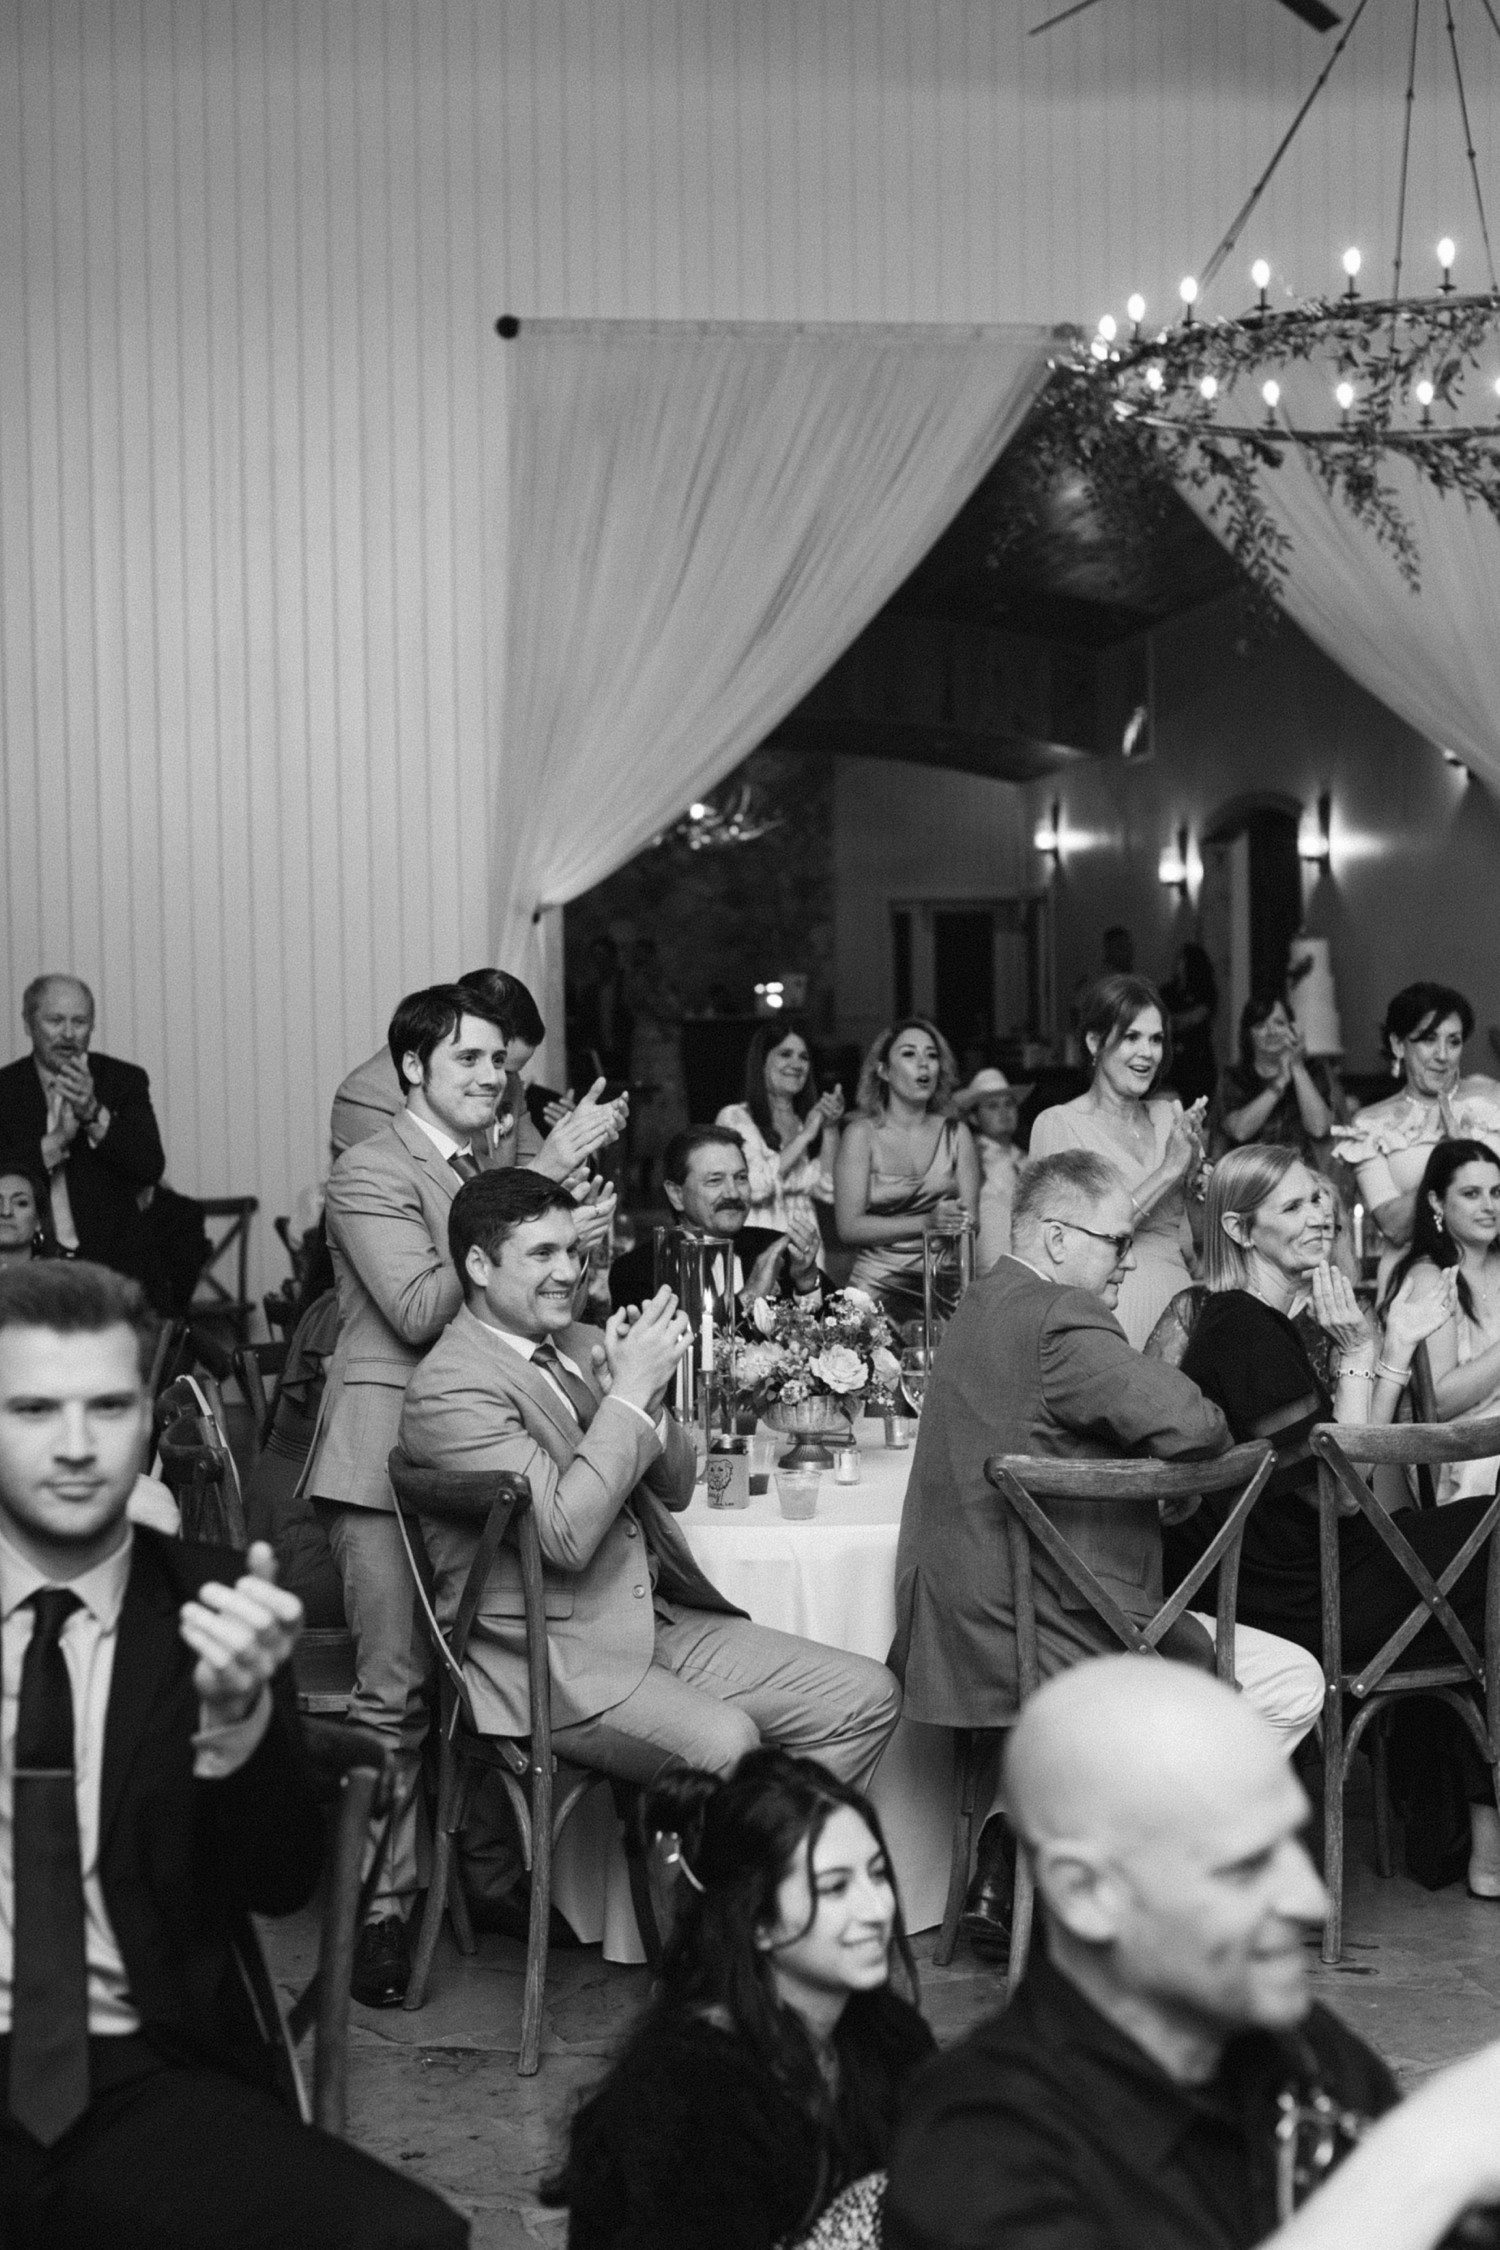 Guests clapping during wedding reception.